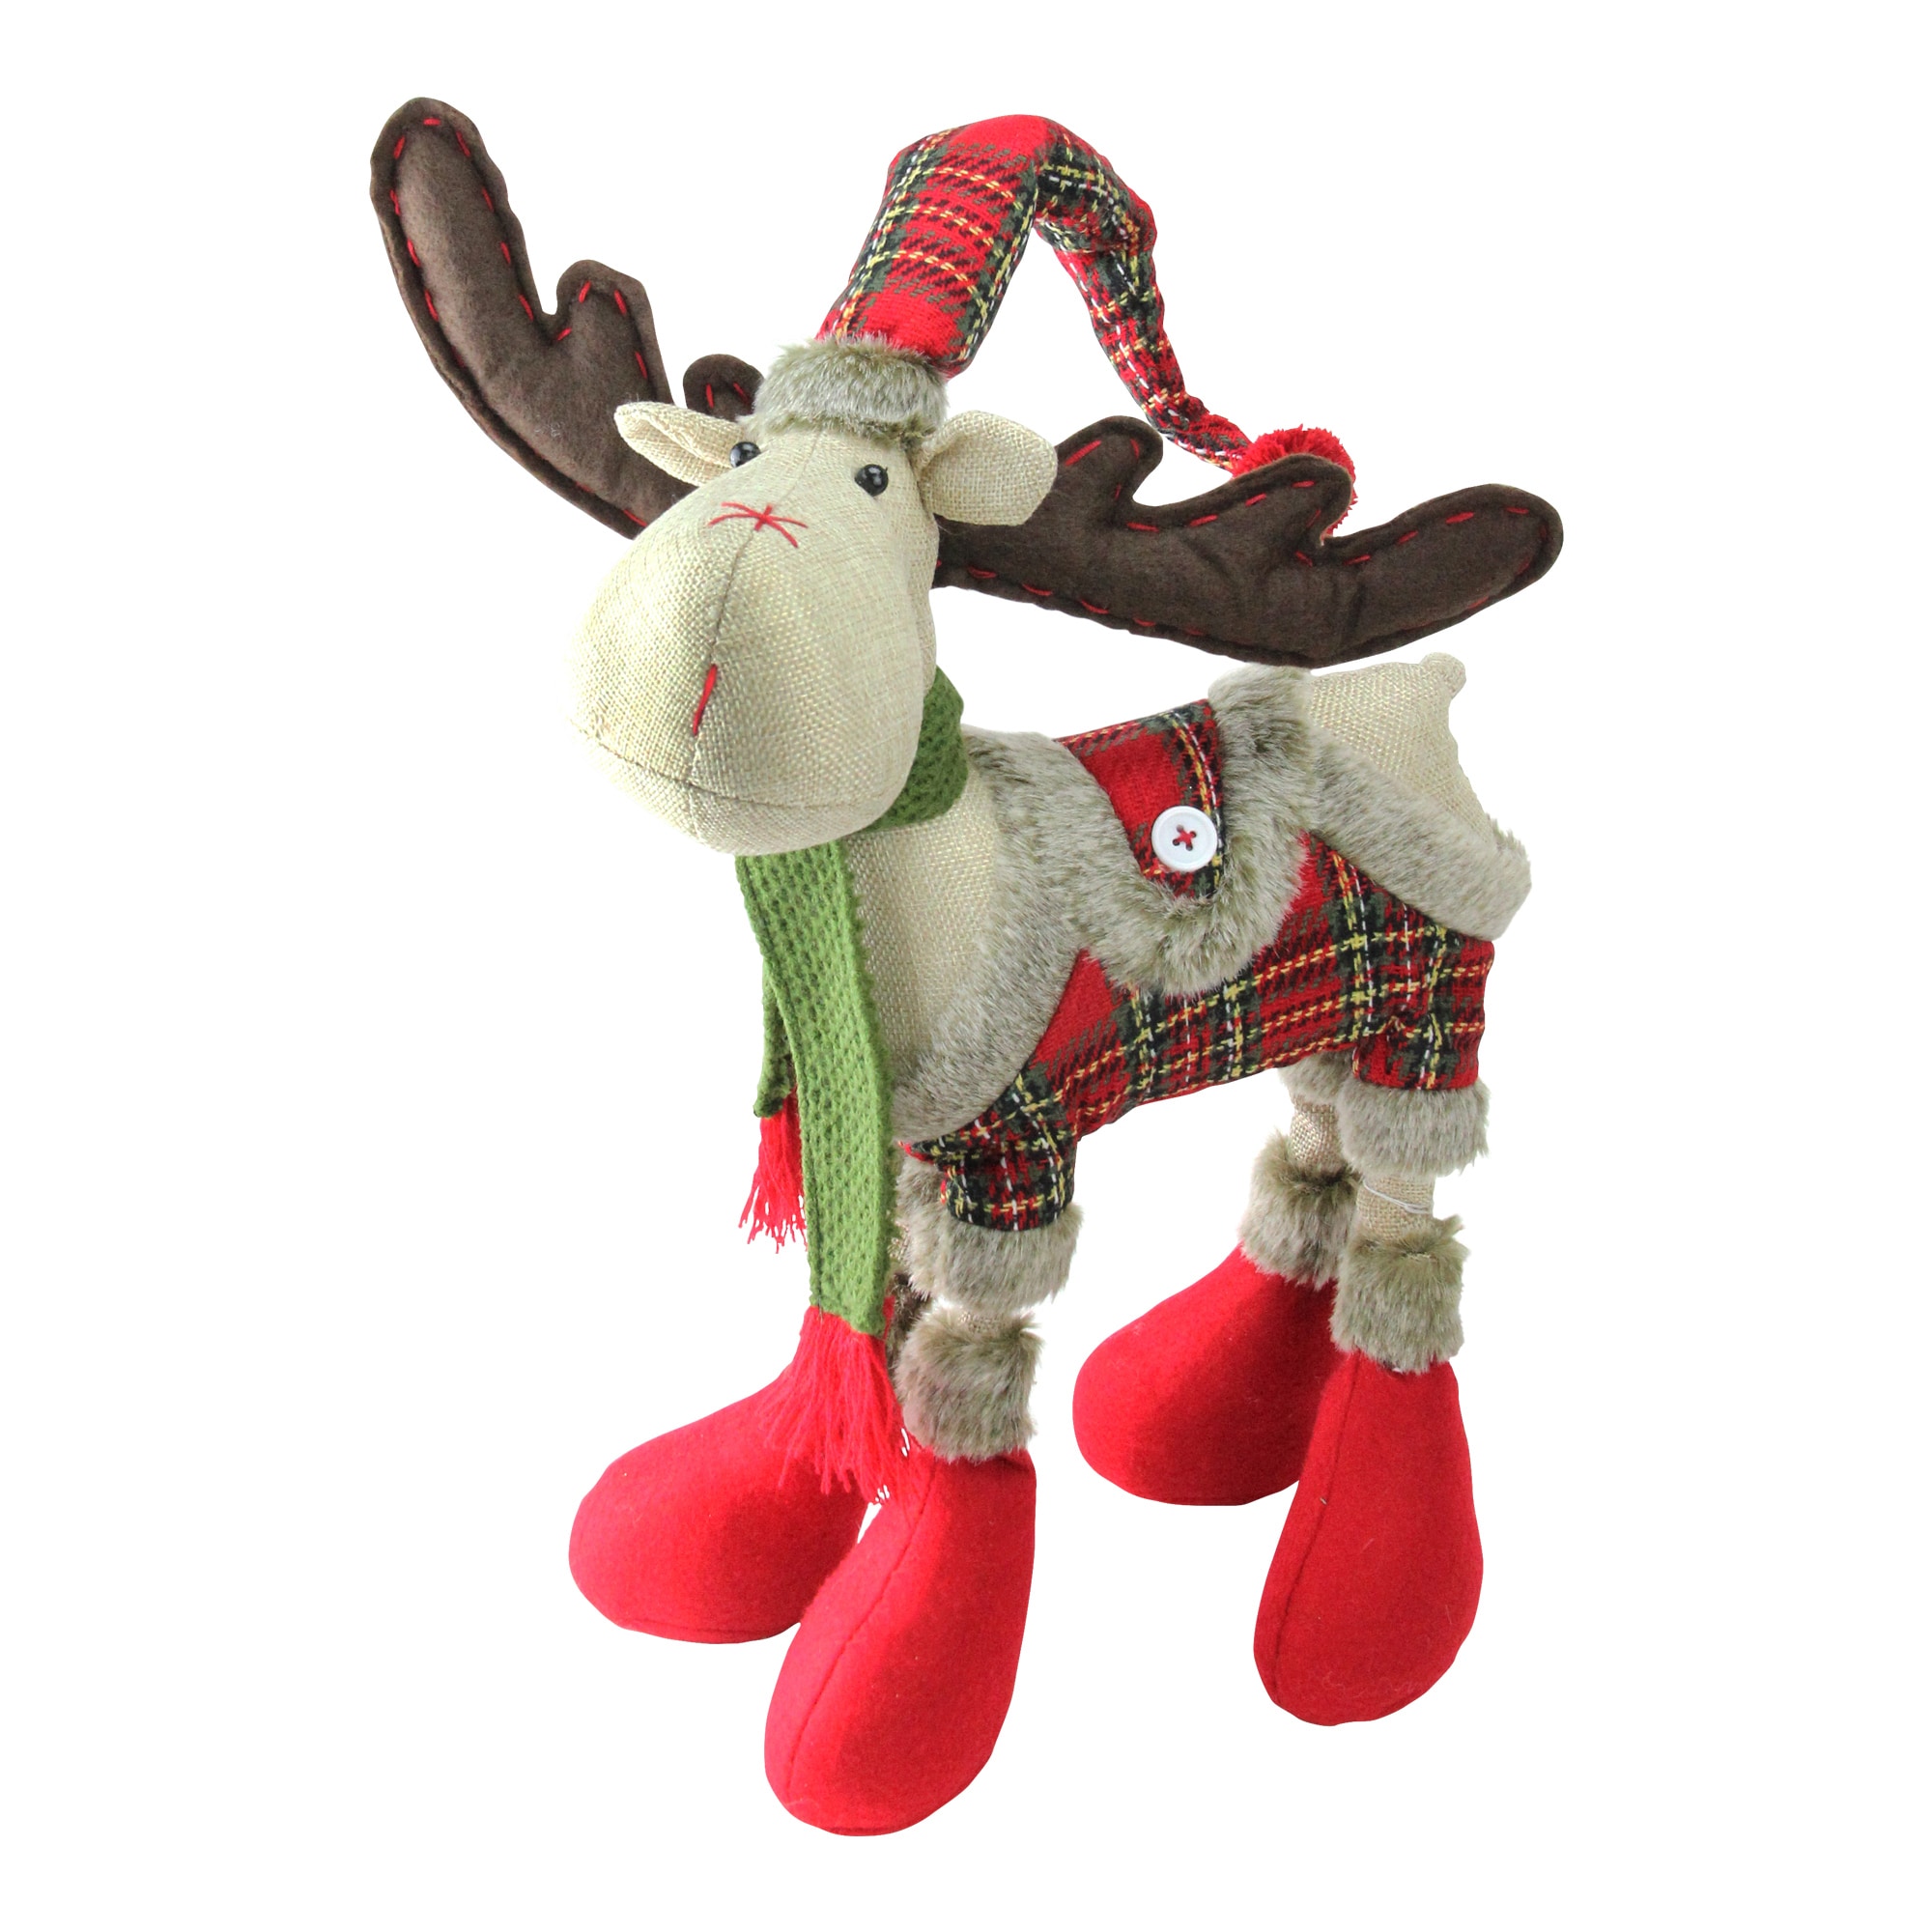 Northlight 25-in Figurine Reindeer Christmas Decor at Lowes.com